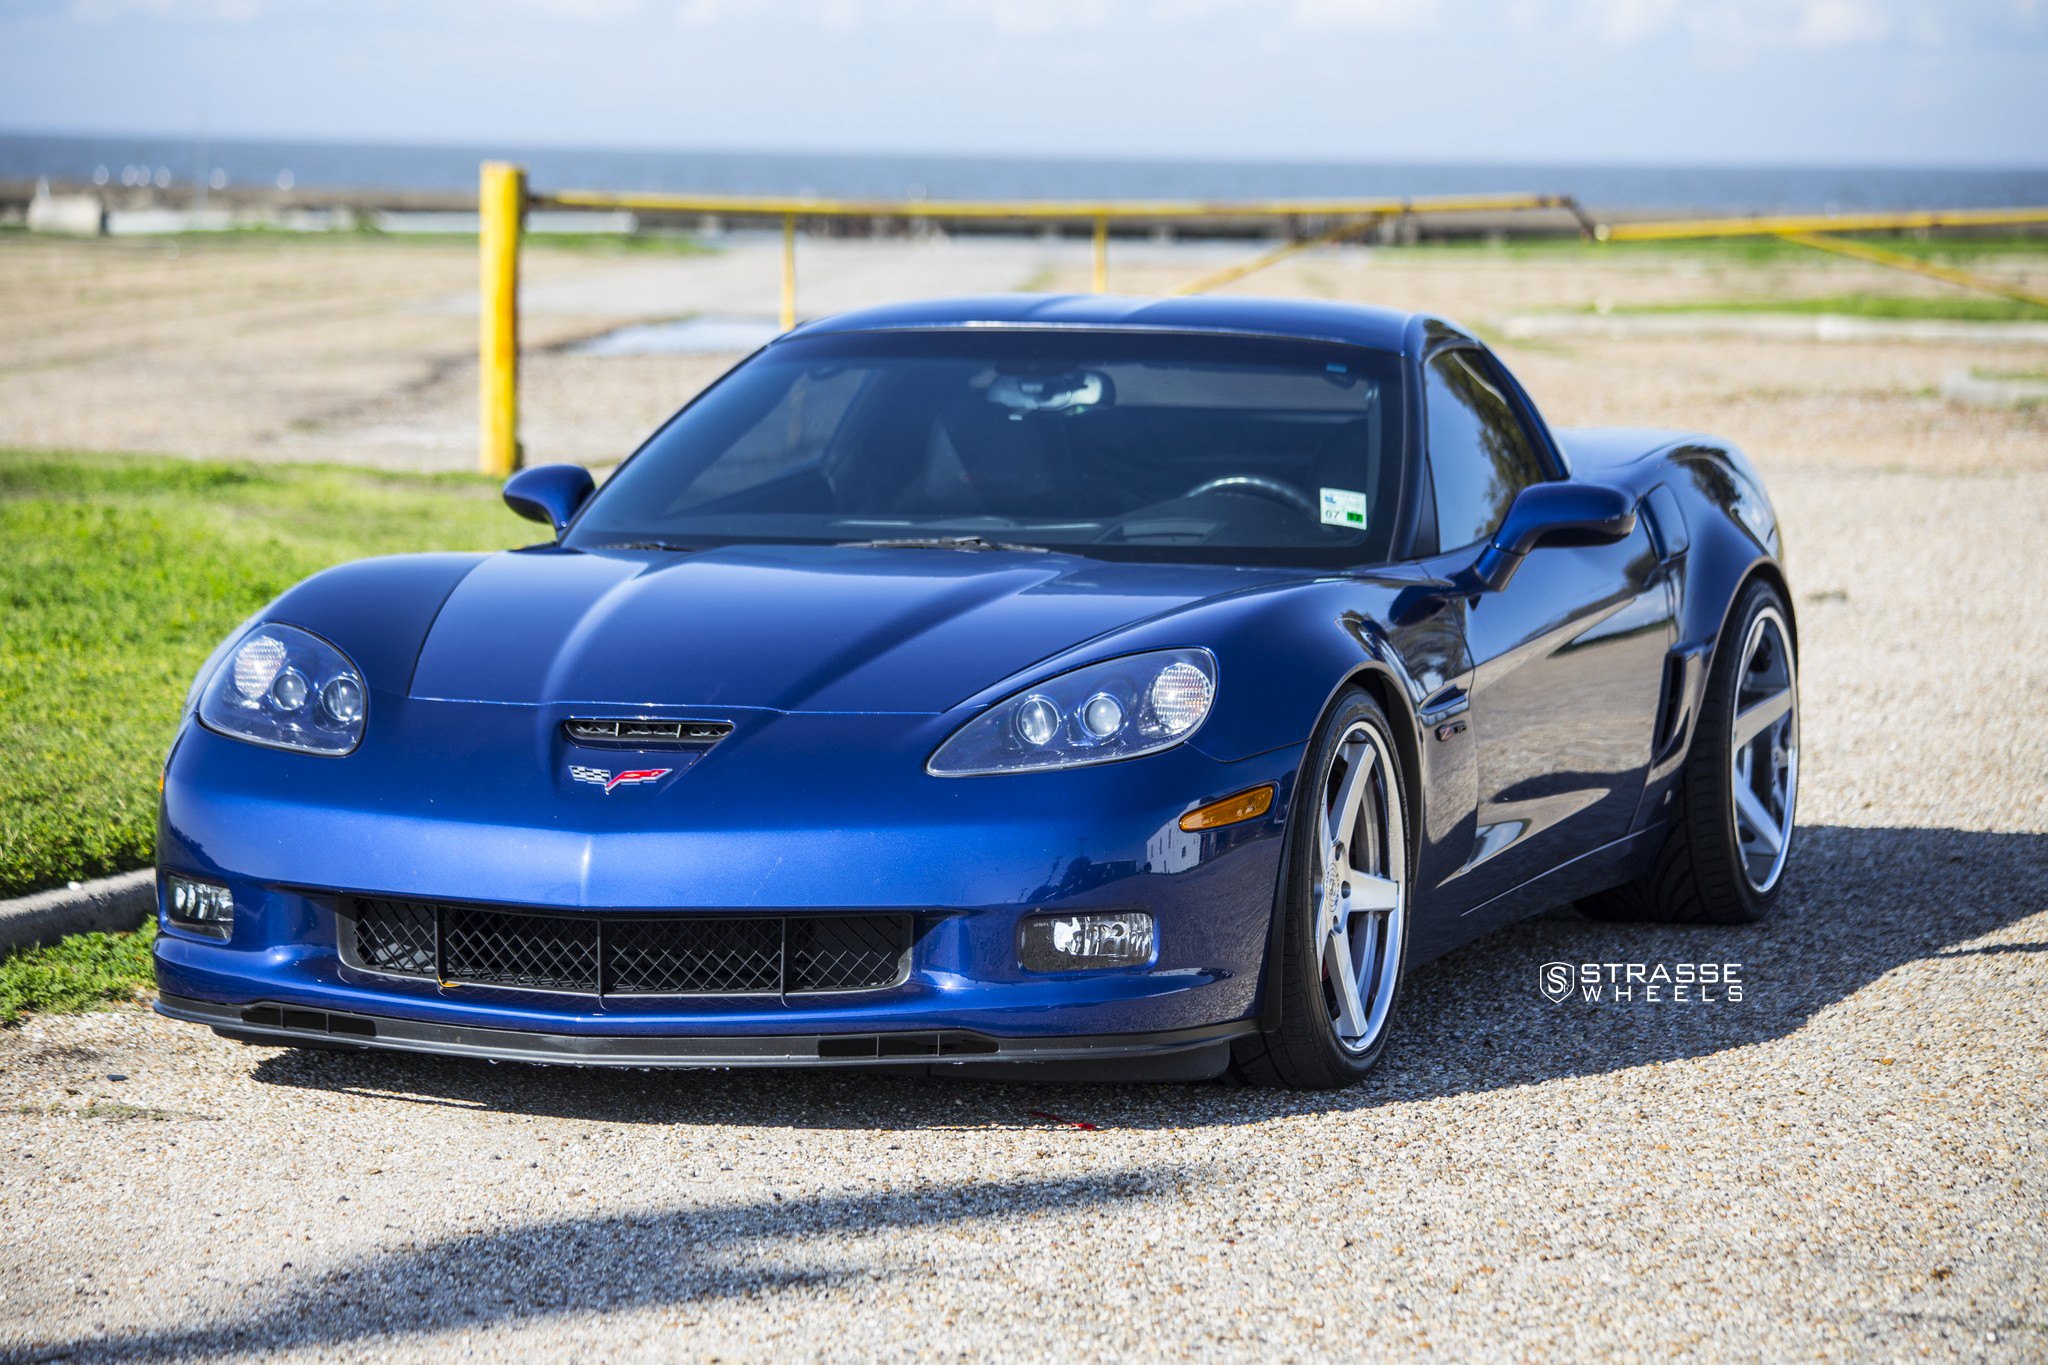 Blue Chevy Corvette with Custom Halo Headlights - Photo by Strasse Forged